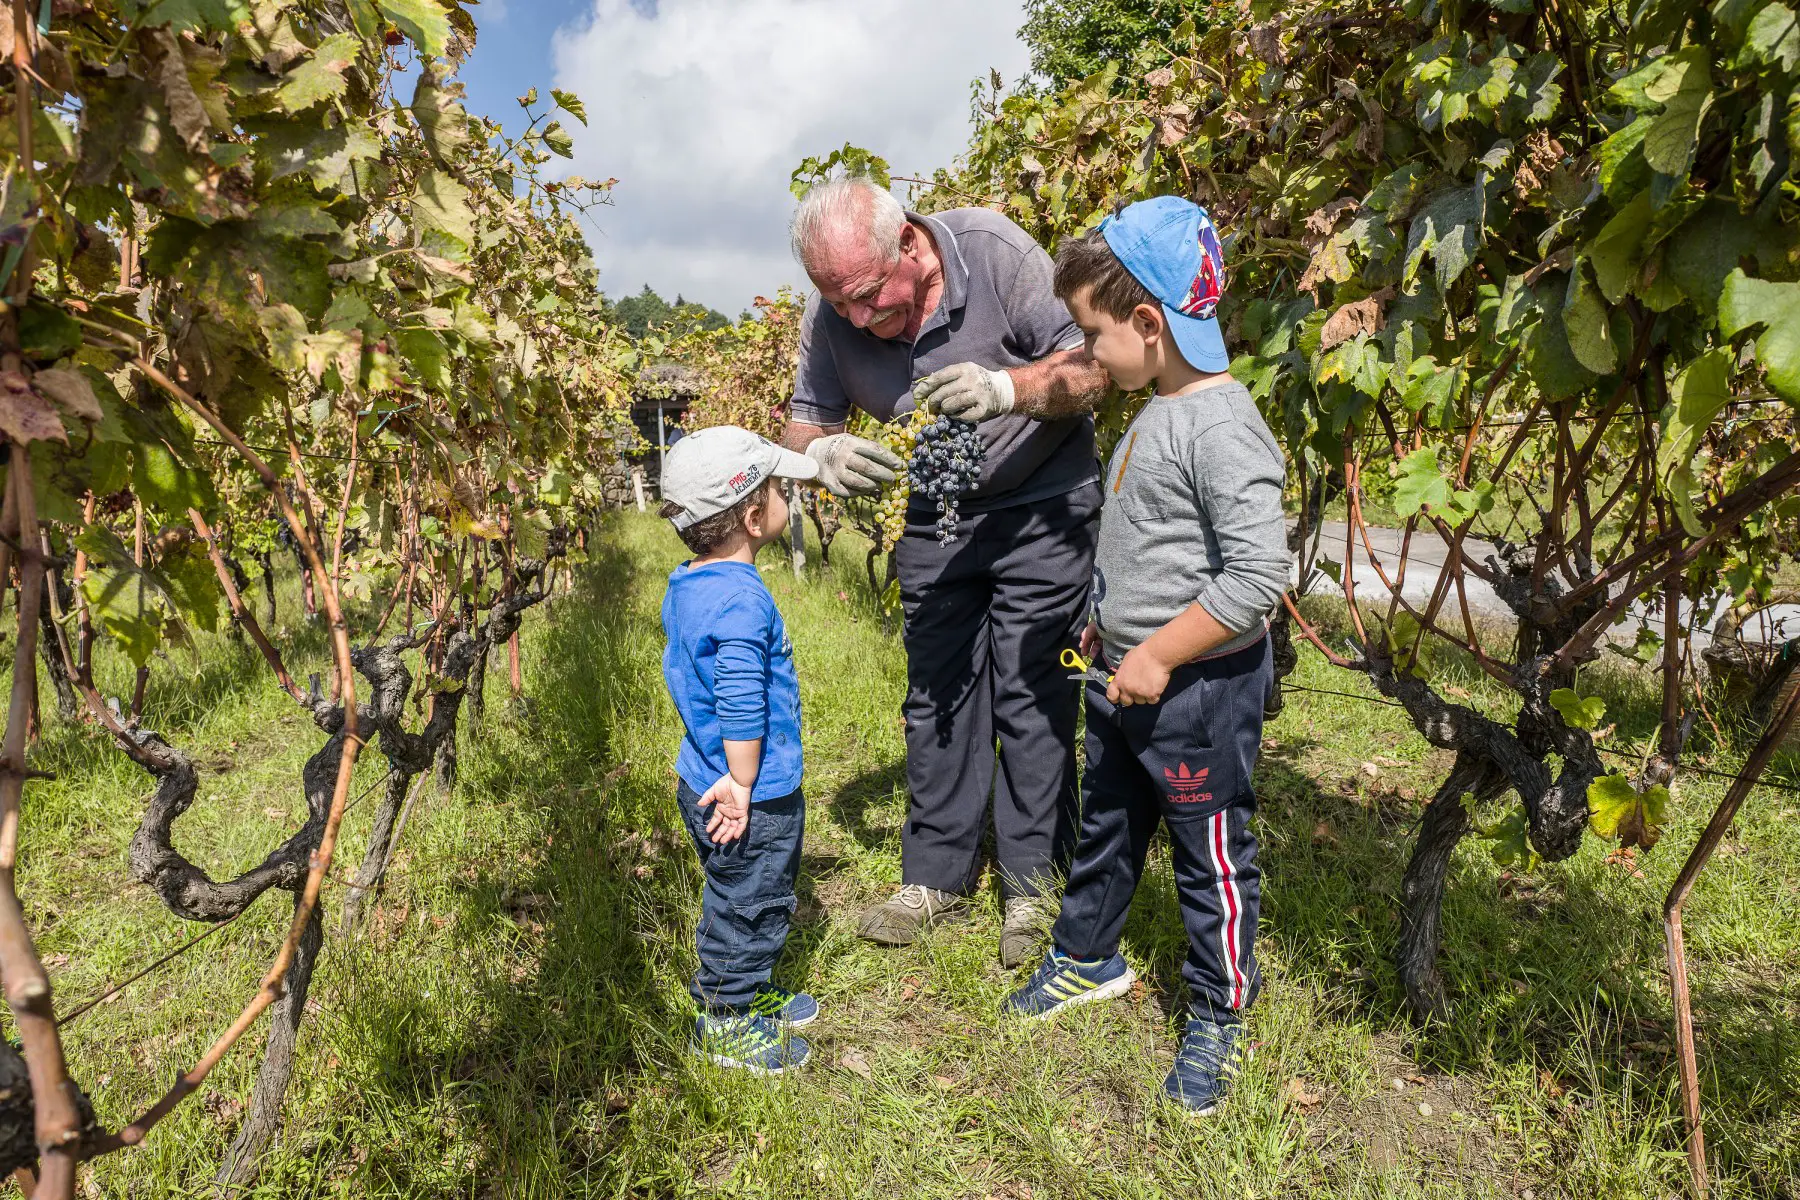 Children and grandfather picking grapes at vineyard